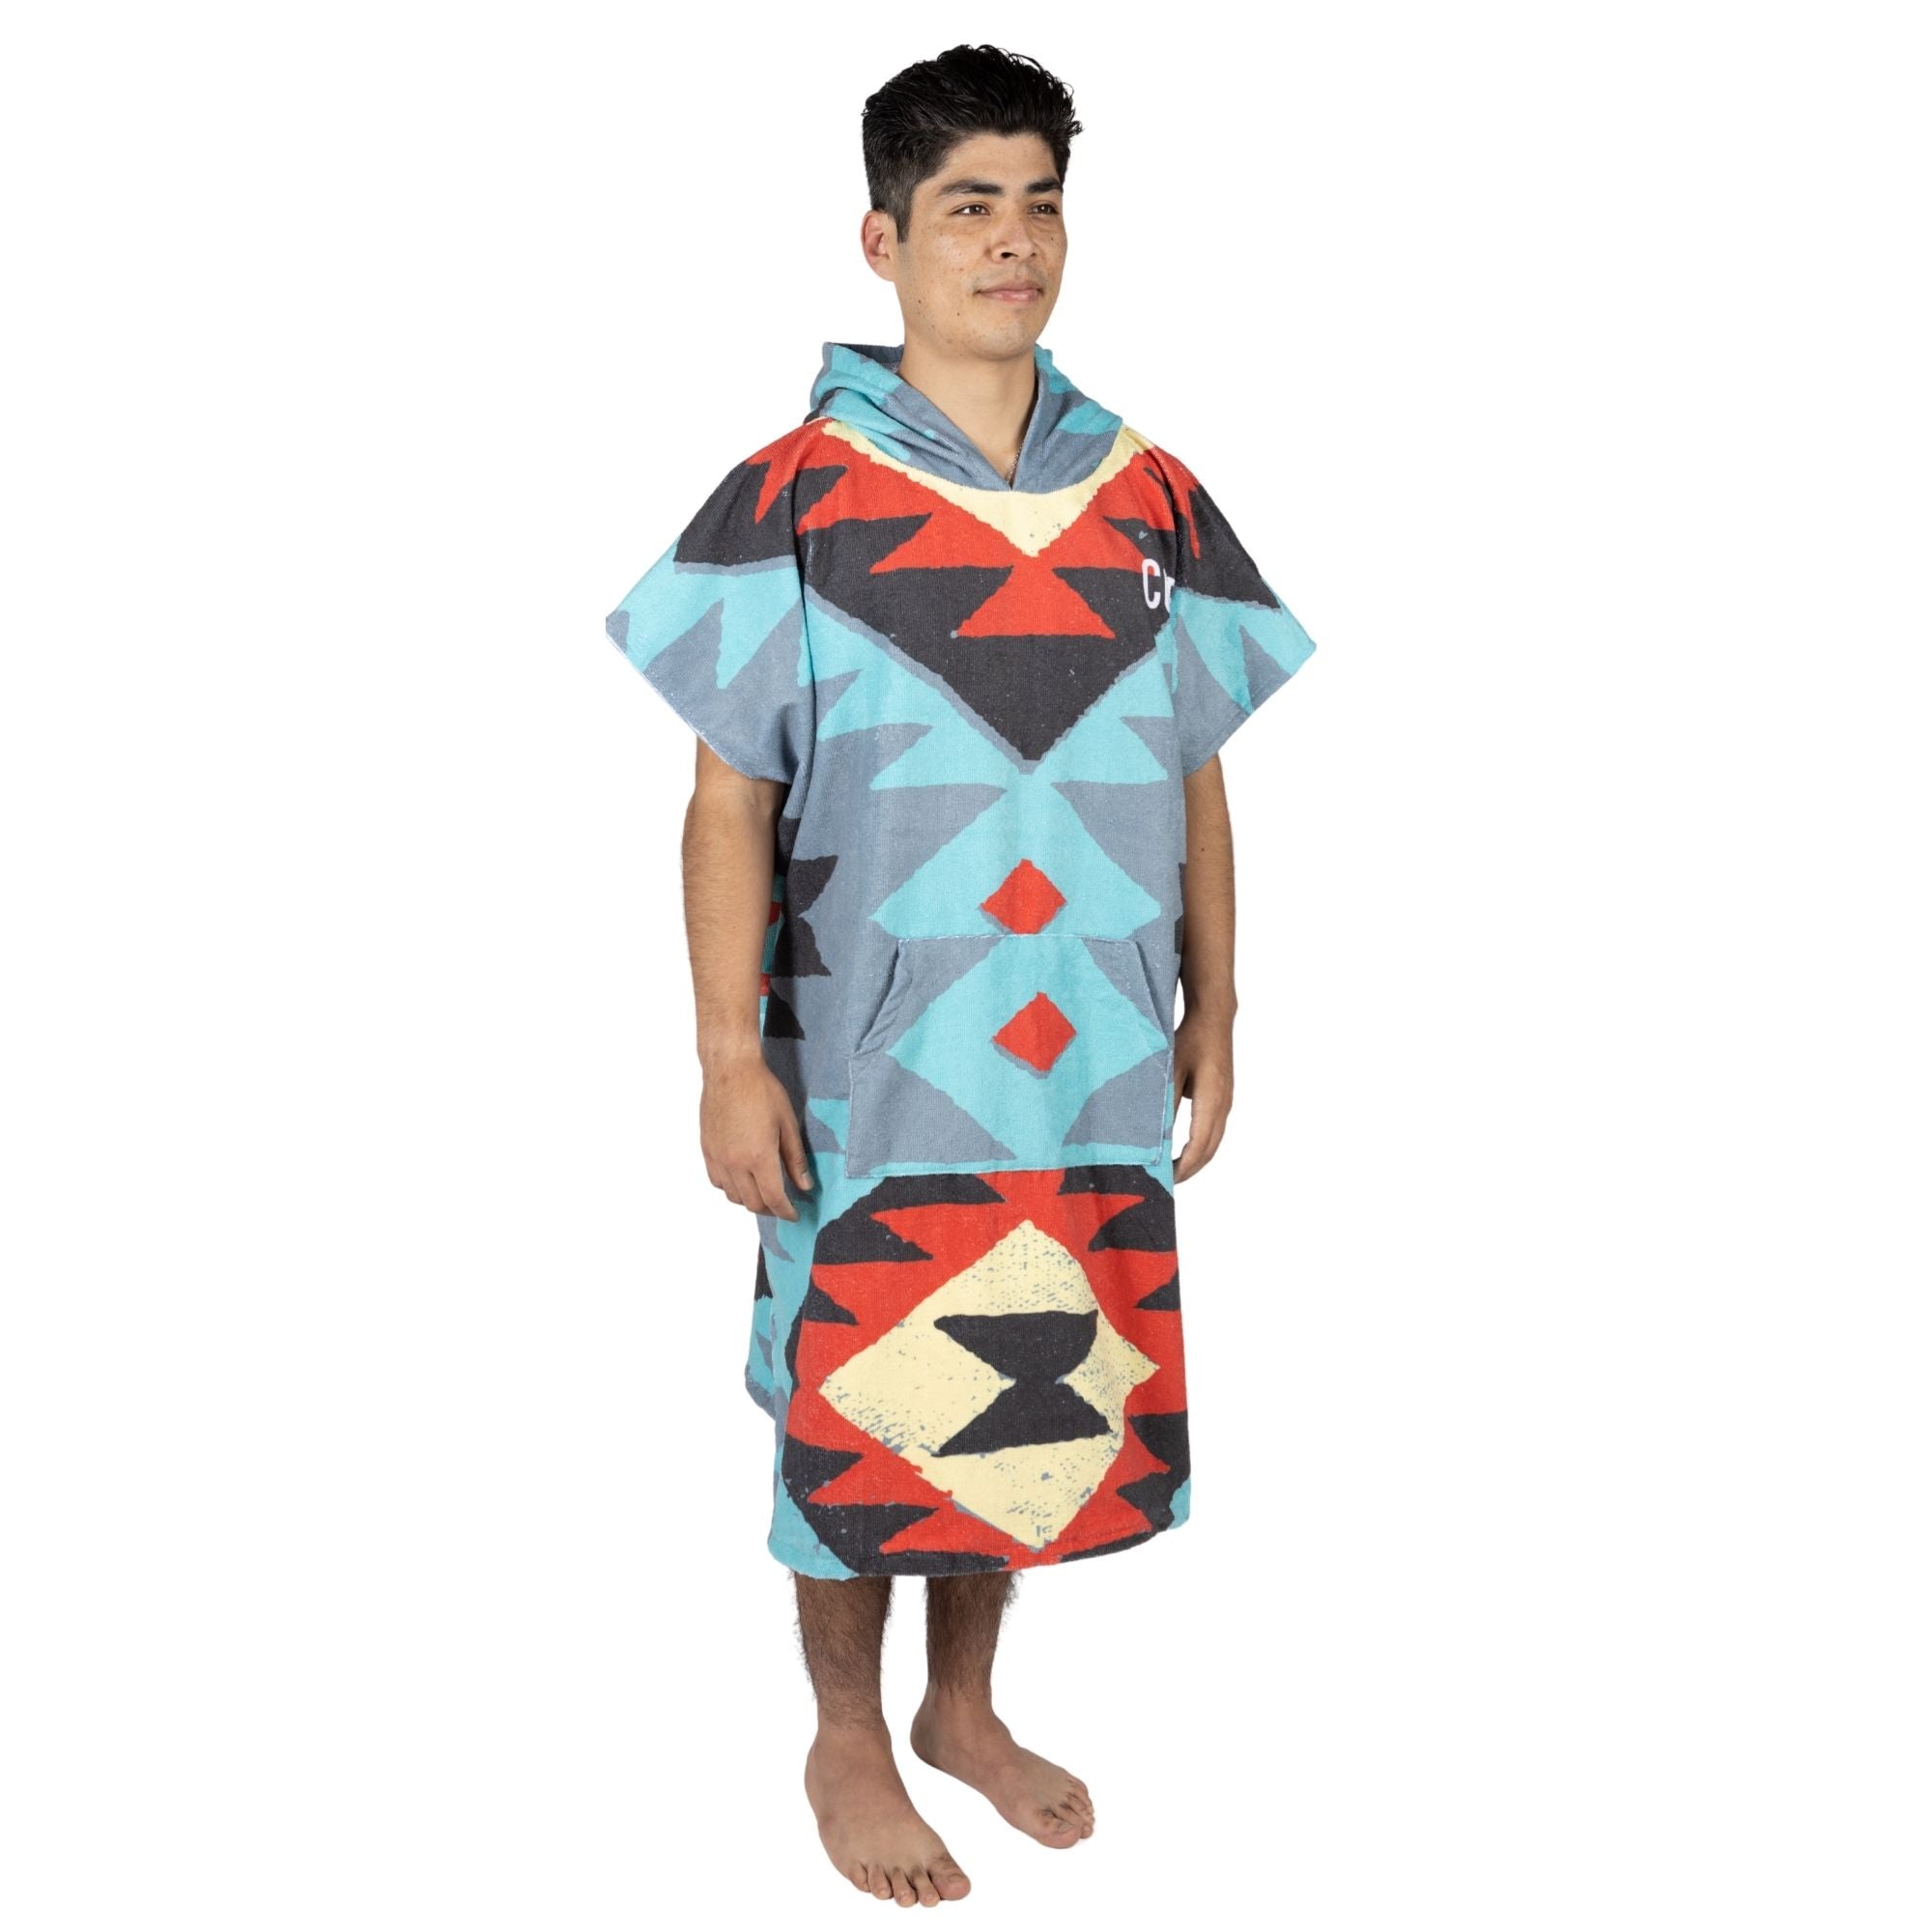 kids changing towel poncho for the beach, surf or pool  adult large